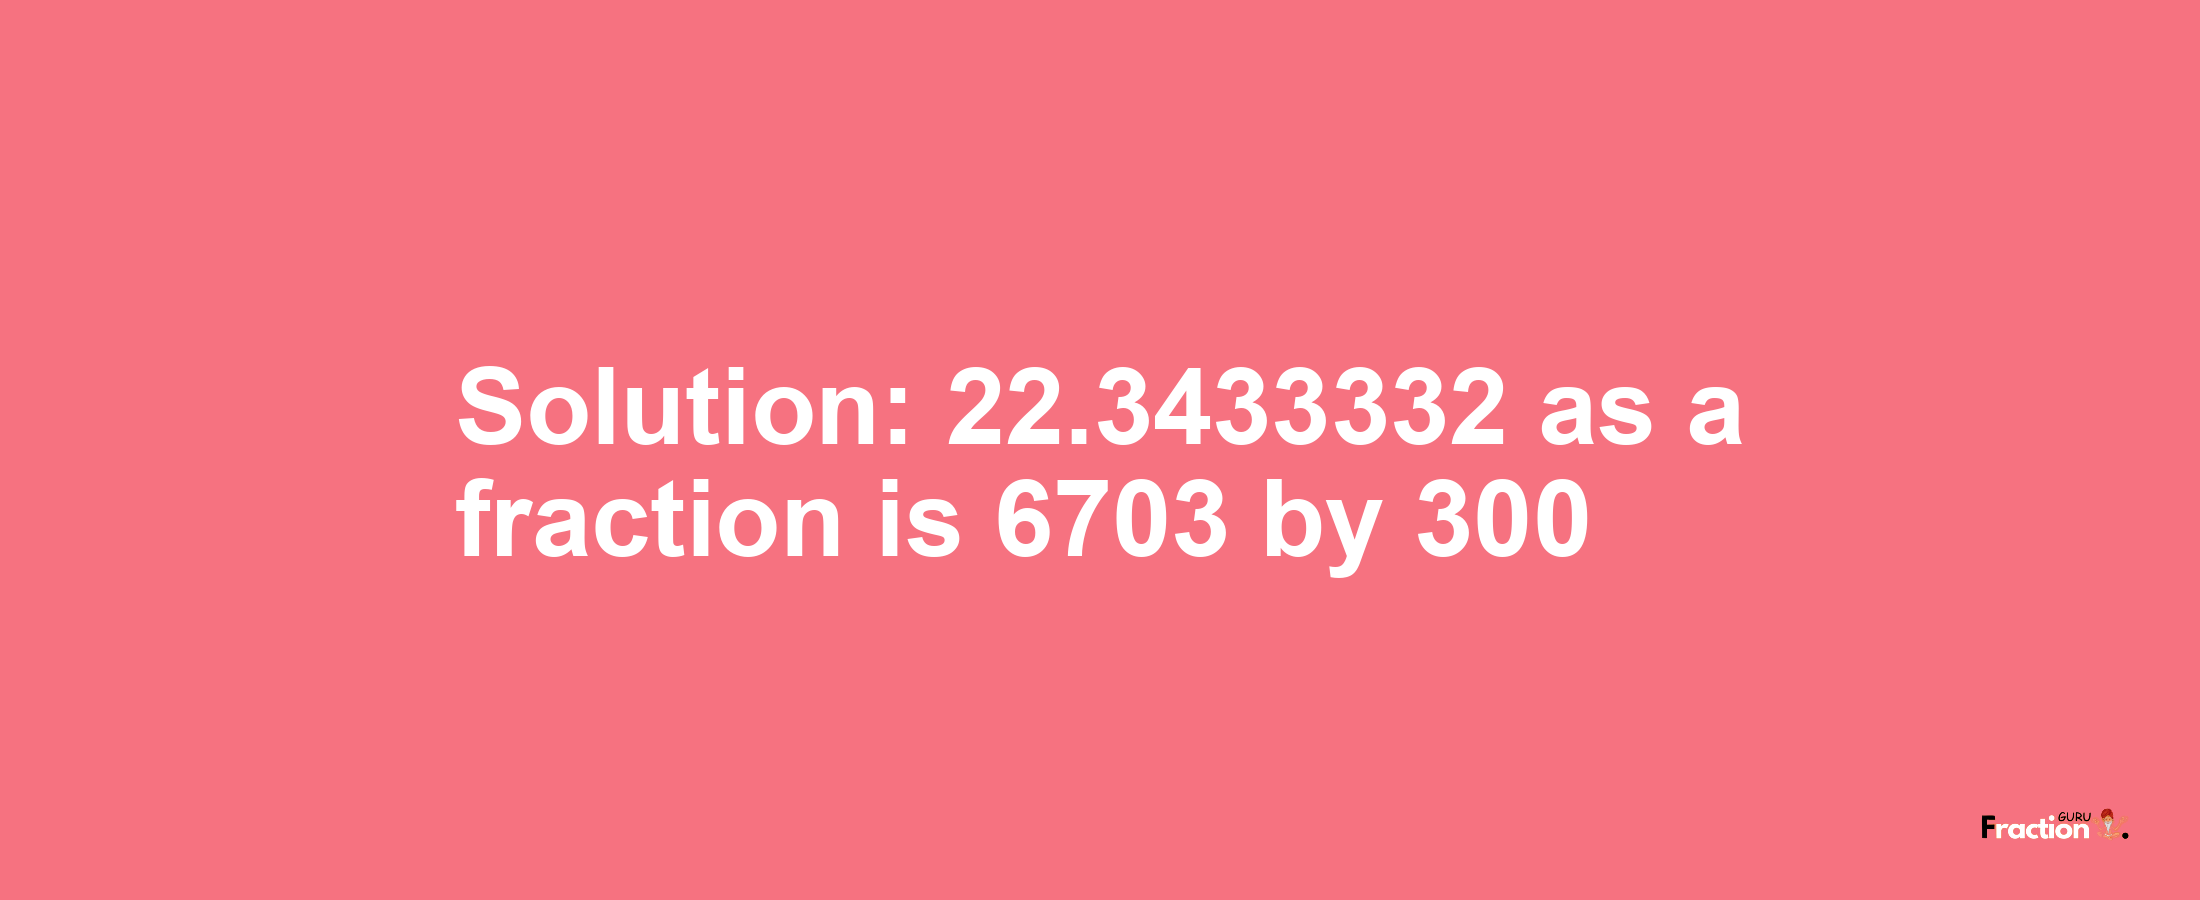 Solution:22.3433332 as a fraction is 6703/300